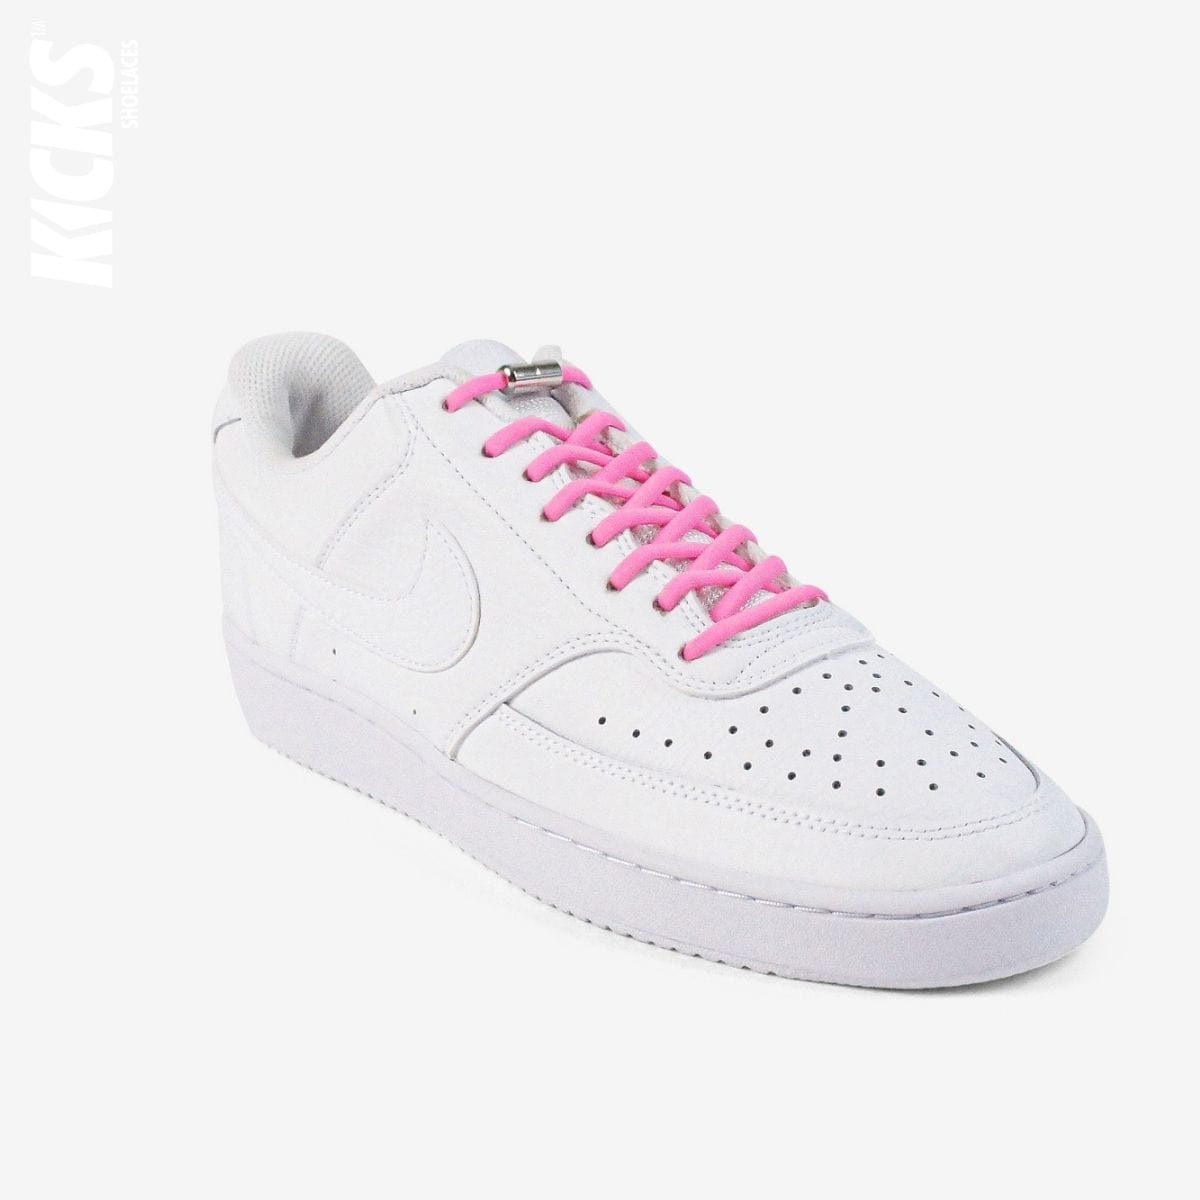 round-no-tie-shoelaces-with-hot-pink-laces-on-nike-white-sneakers-by-kicks-shoelaces